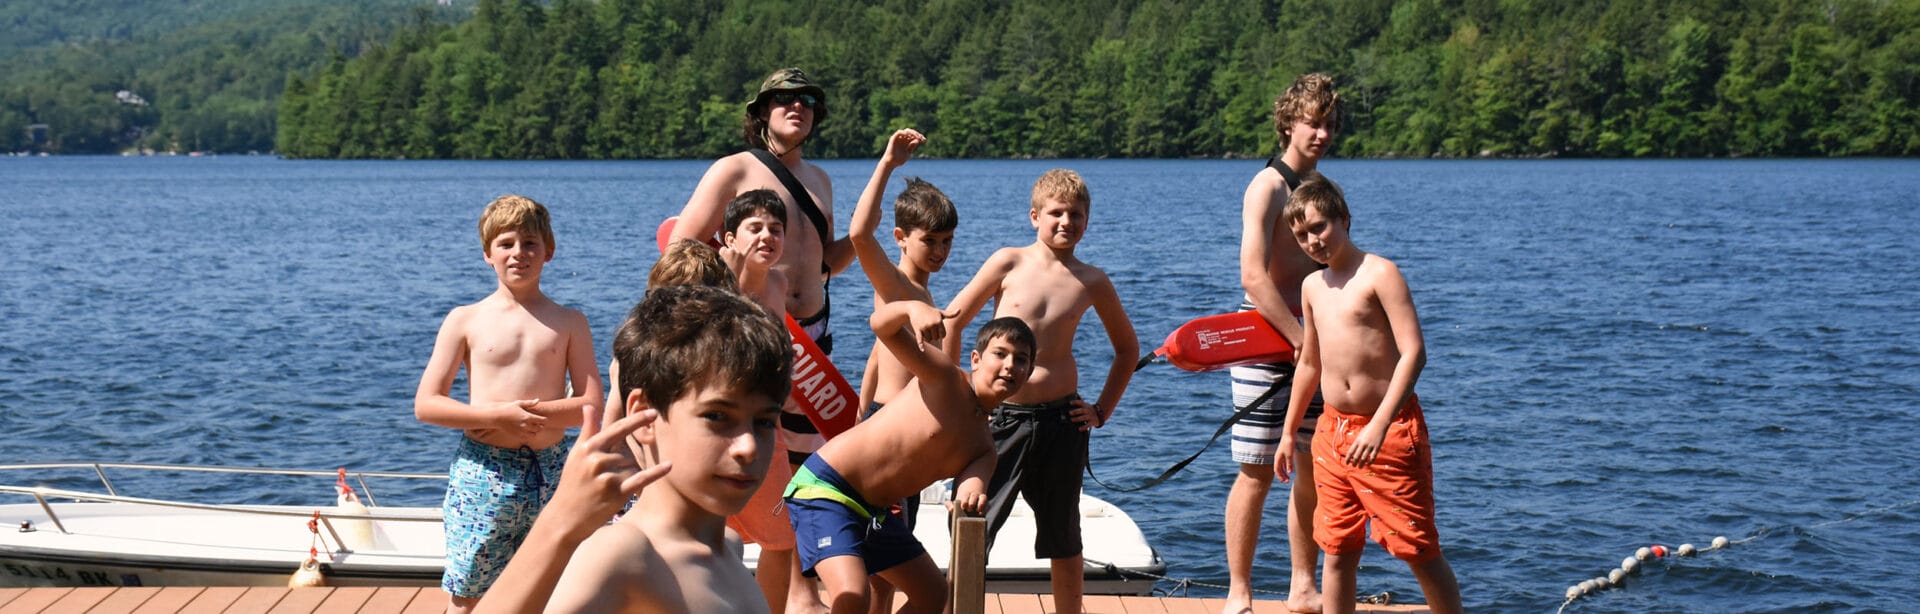 Summer Outdoor Camp for boys in New Hampshire - things to pack for camp